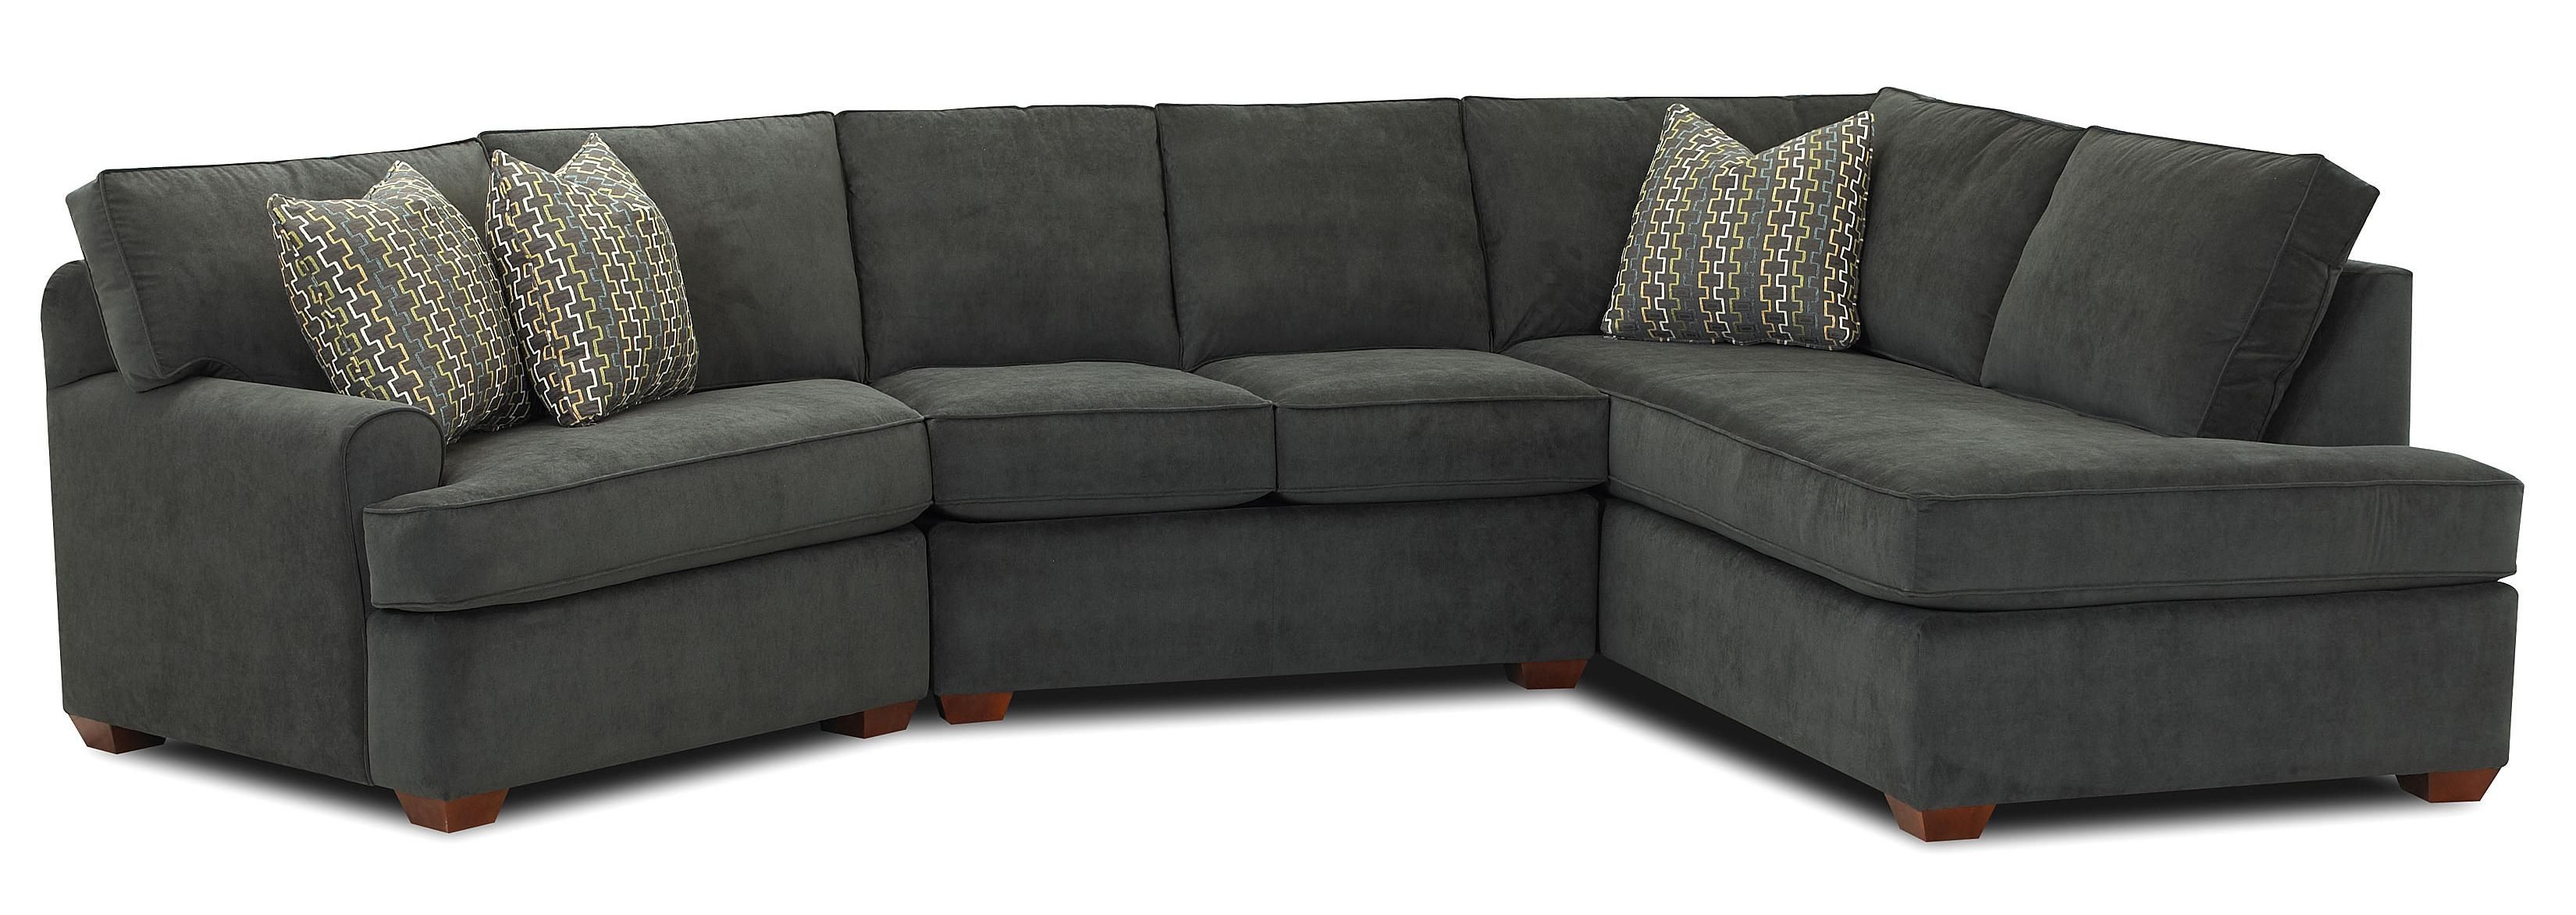 Popular Gray Sectional Sofa With Chaise Lounge 87 In Angled Sofa With Angled Sofa Sectional (Photo 1 of 12)